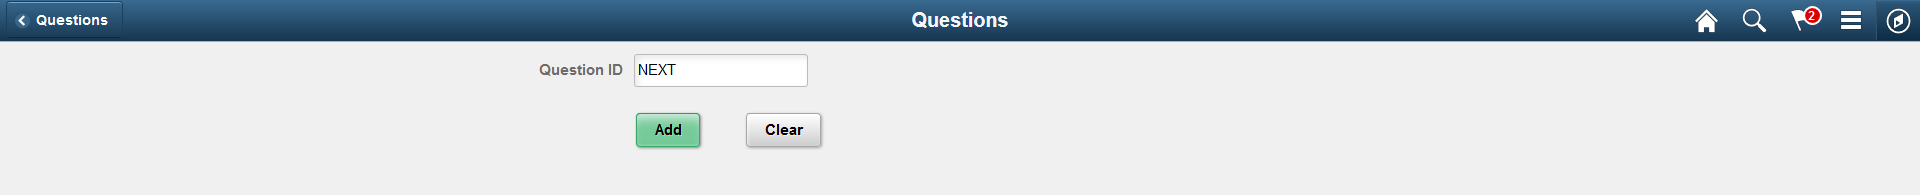 Maintain Question page (Add)